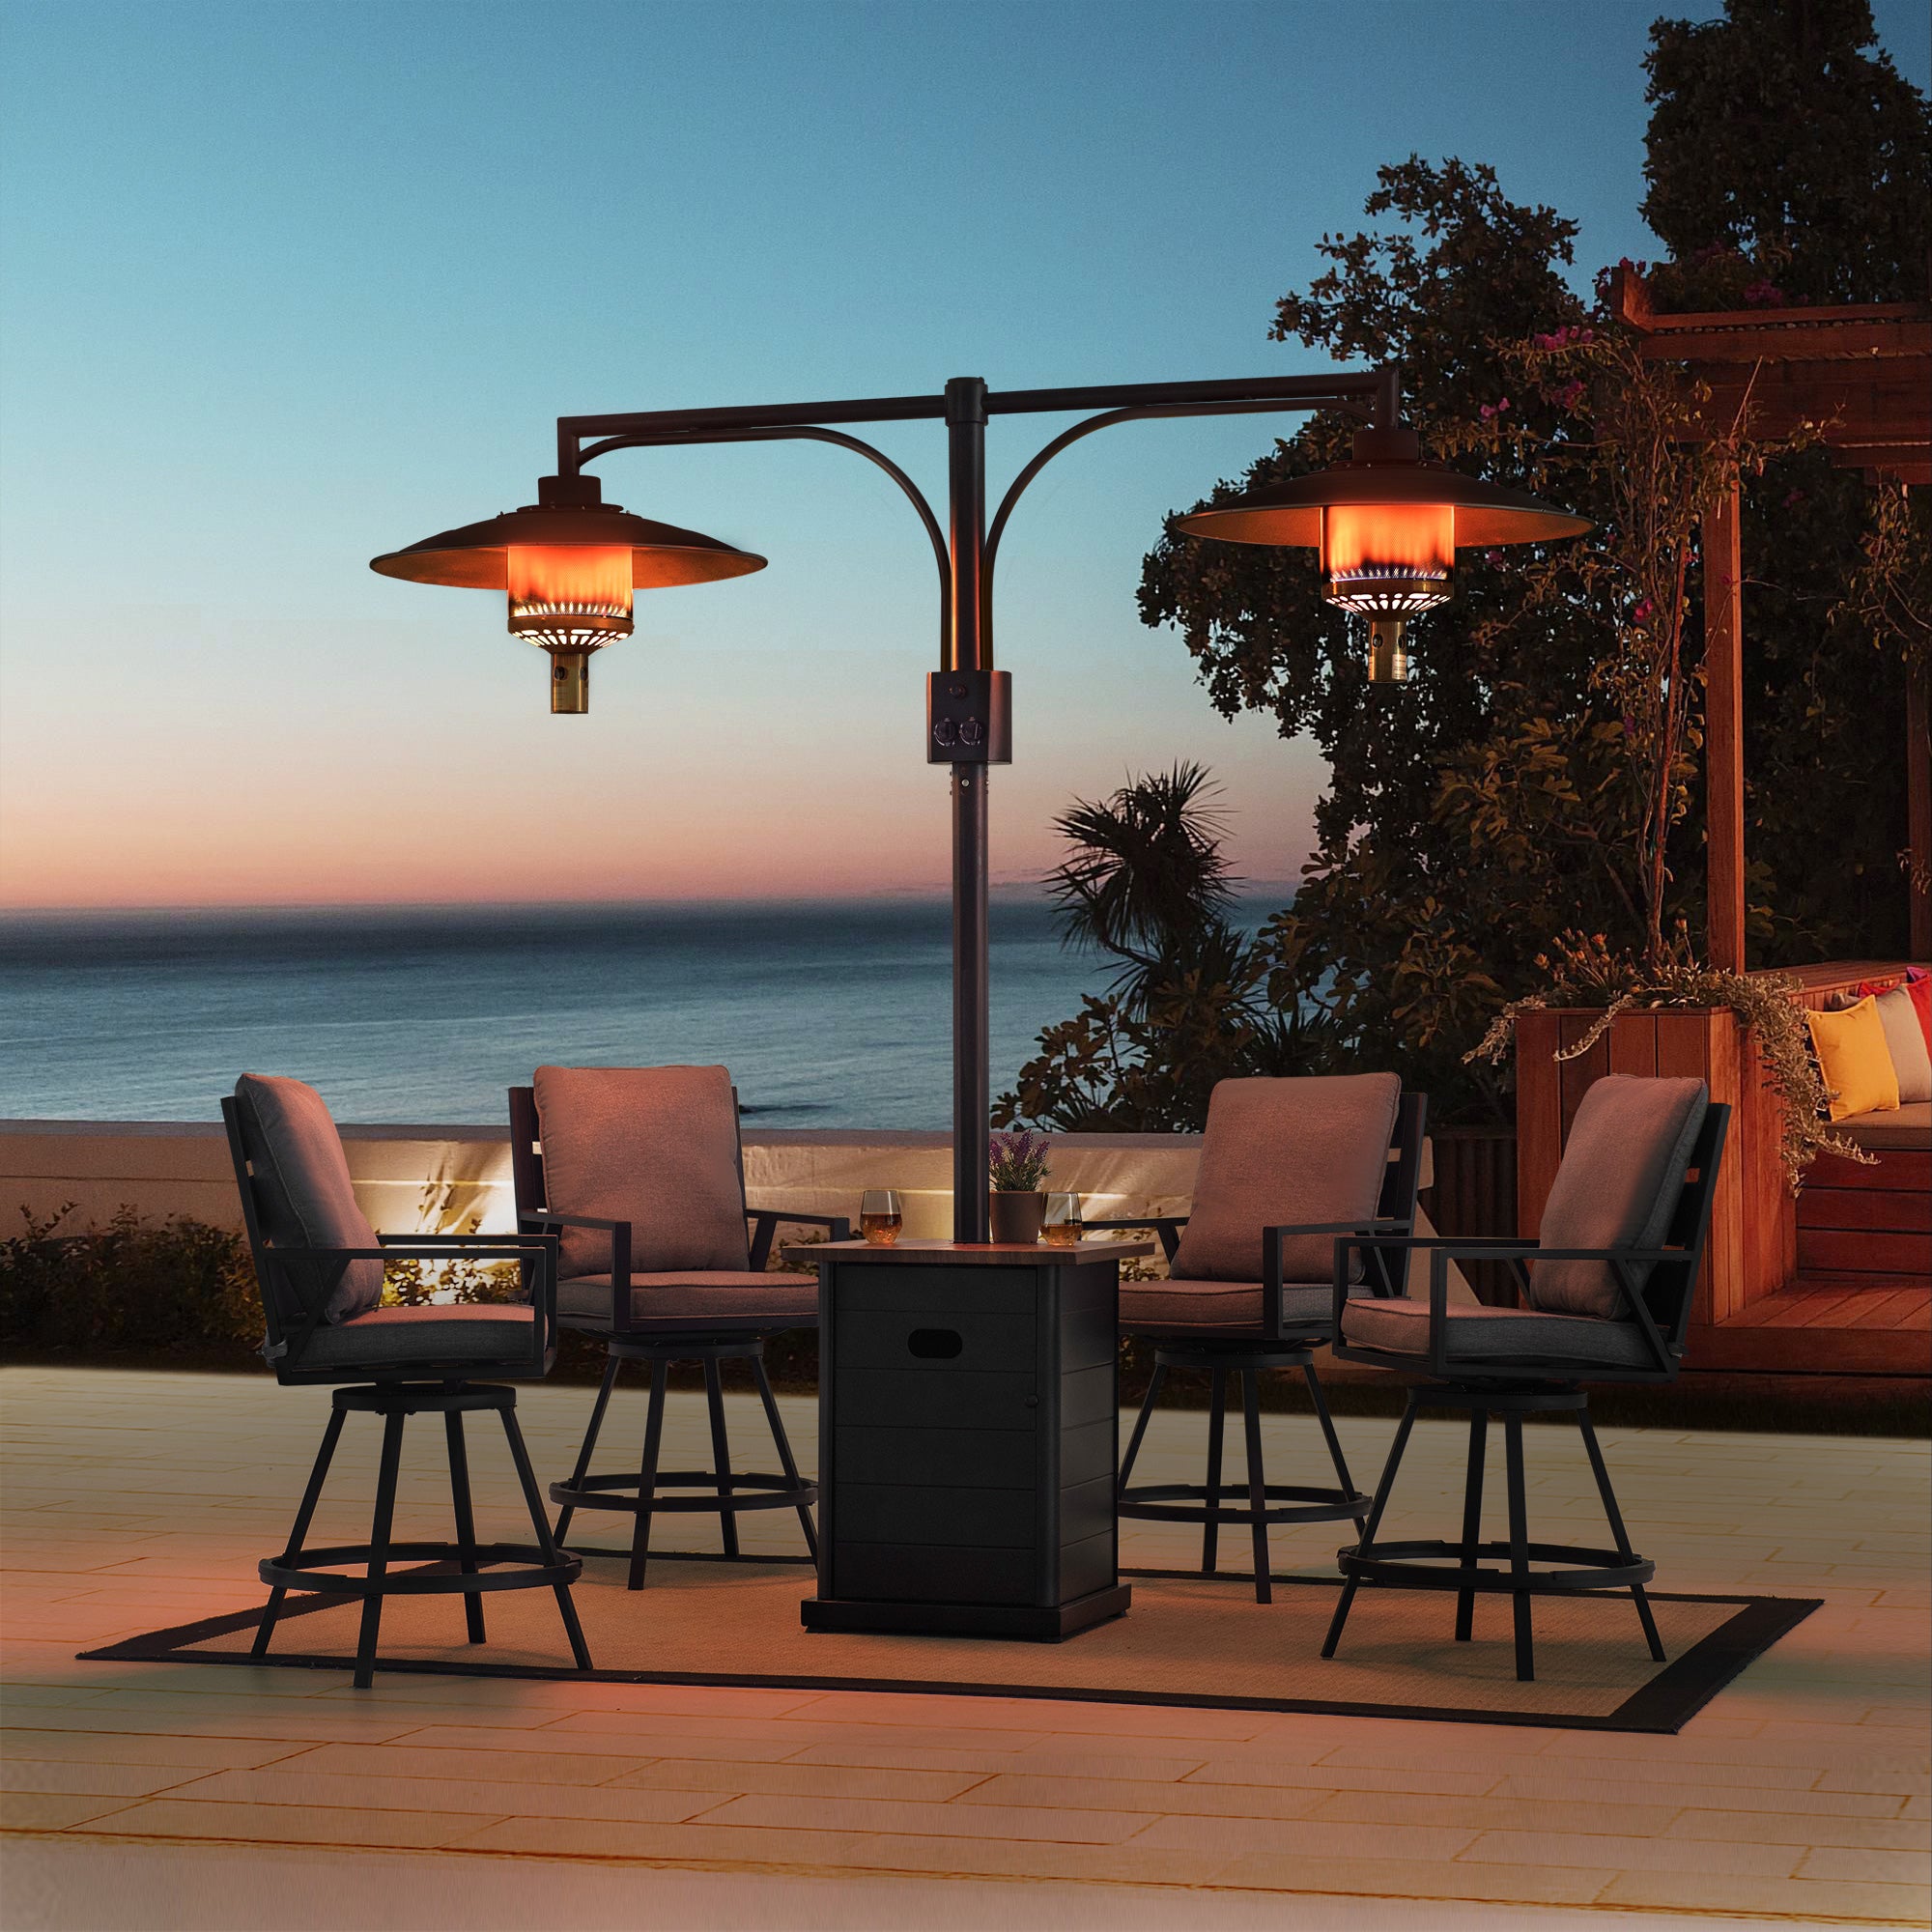 Sunjoy Outdoor Patio 64,000 BTU Black Steel Propane Gas Dual Heater with Table Top for Commercial & Residential Use.